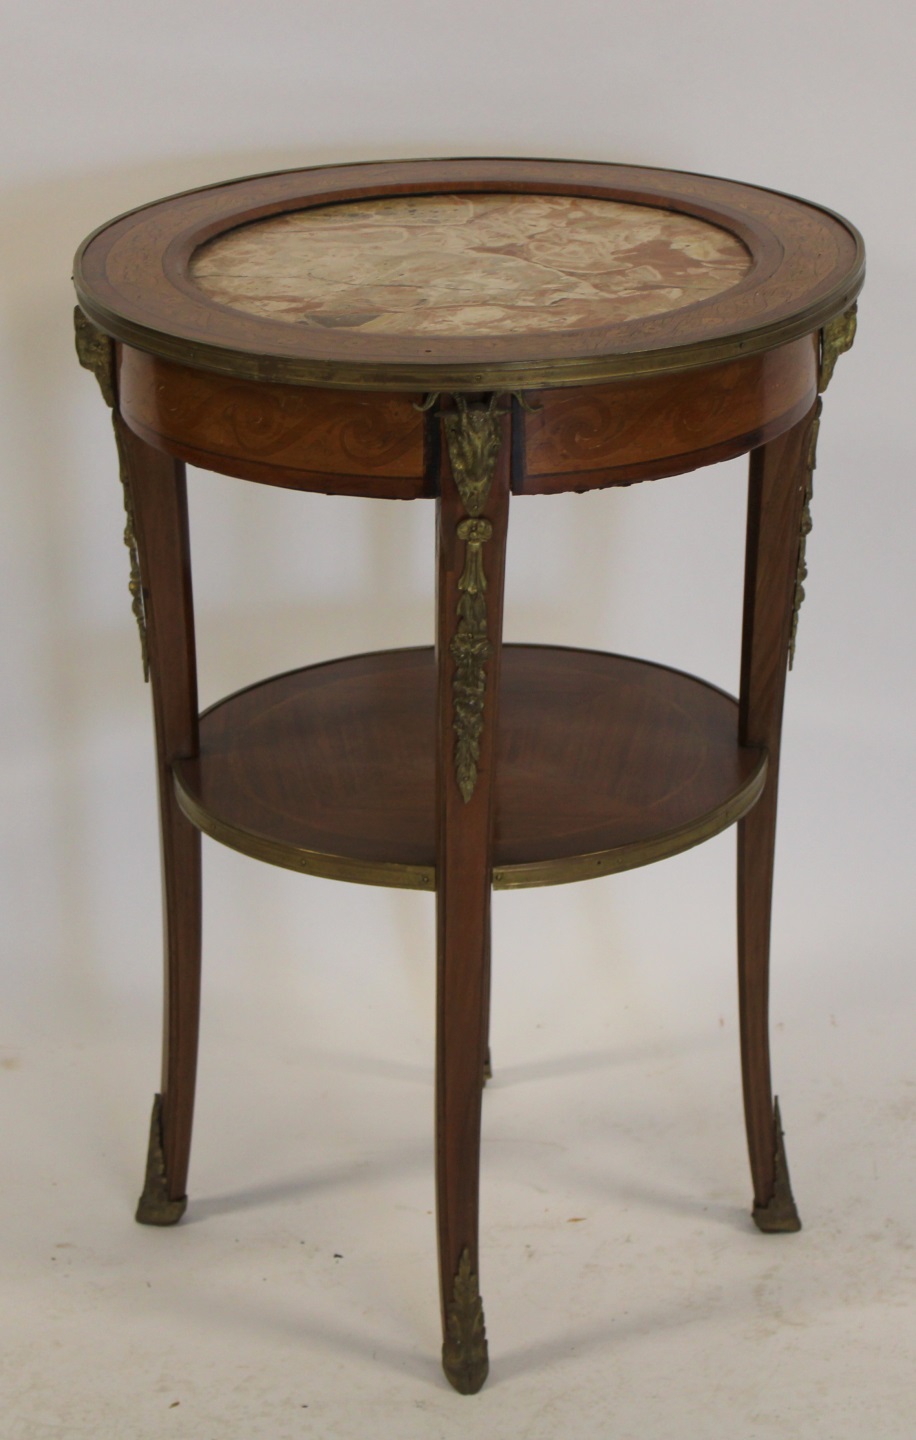 ANTIQUE BRONZE MOUNTED INLAID TABLE 3bbf8b